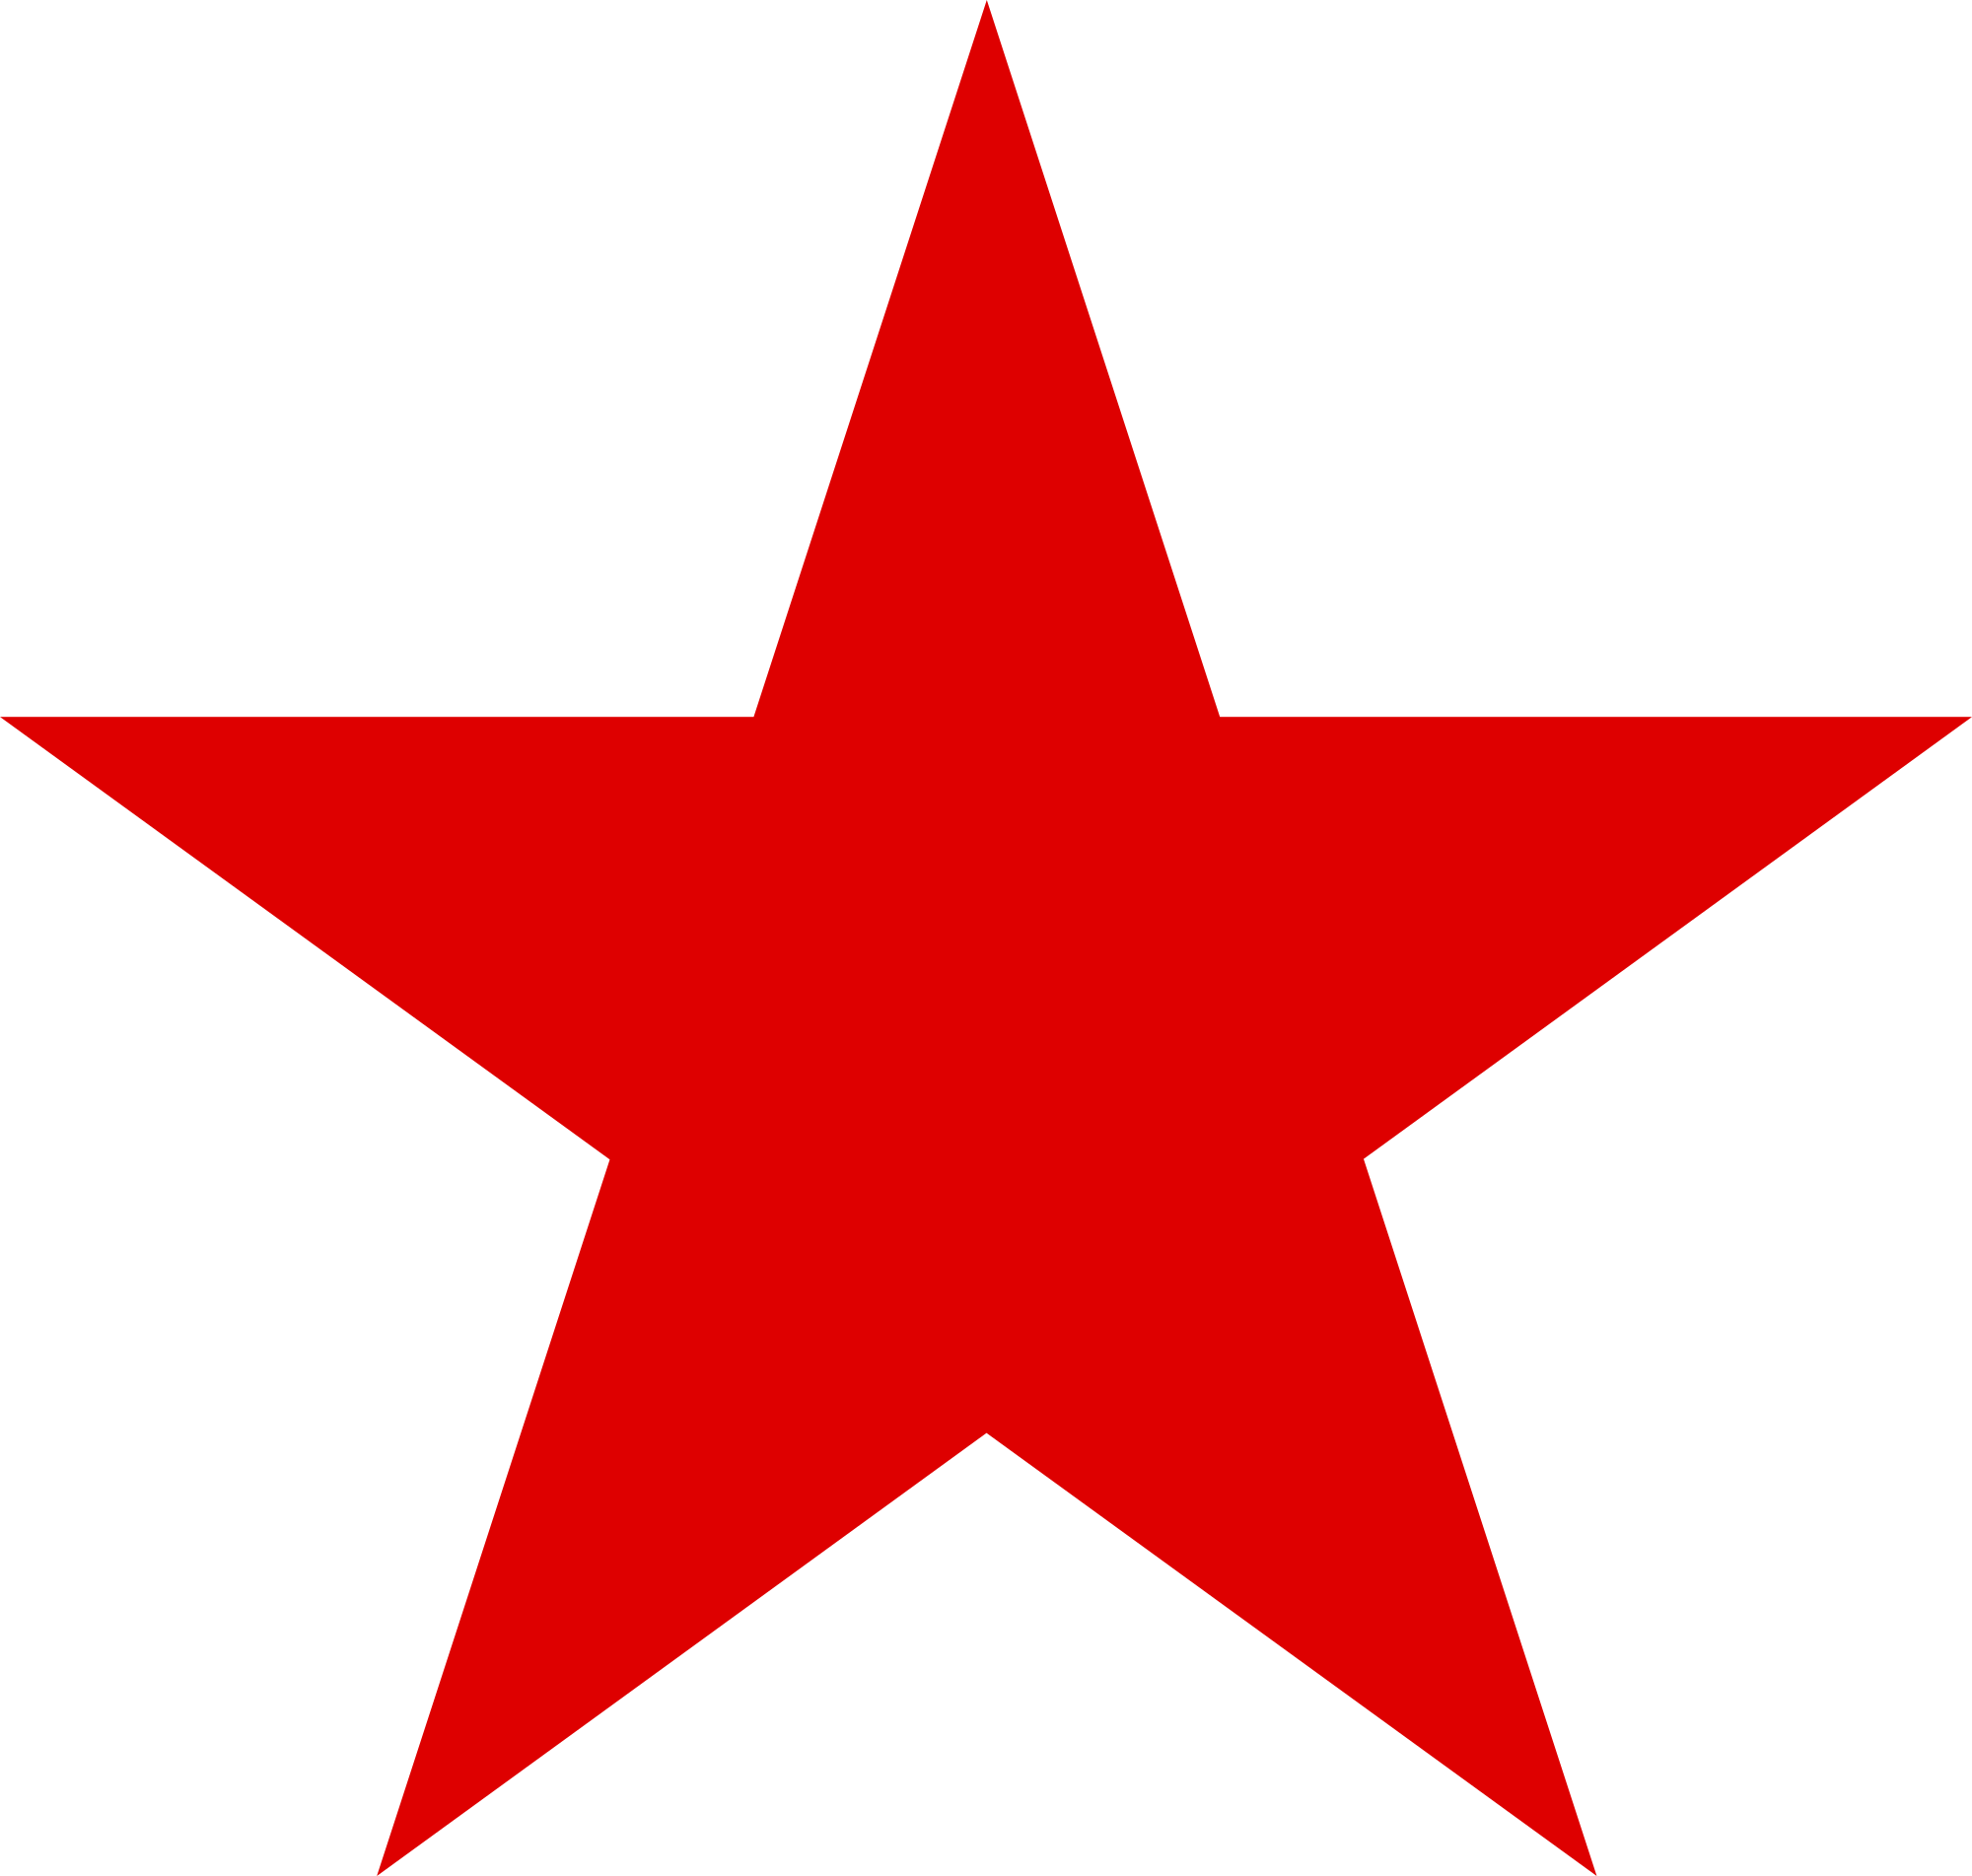 Red and White Star Logo - Red star